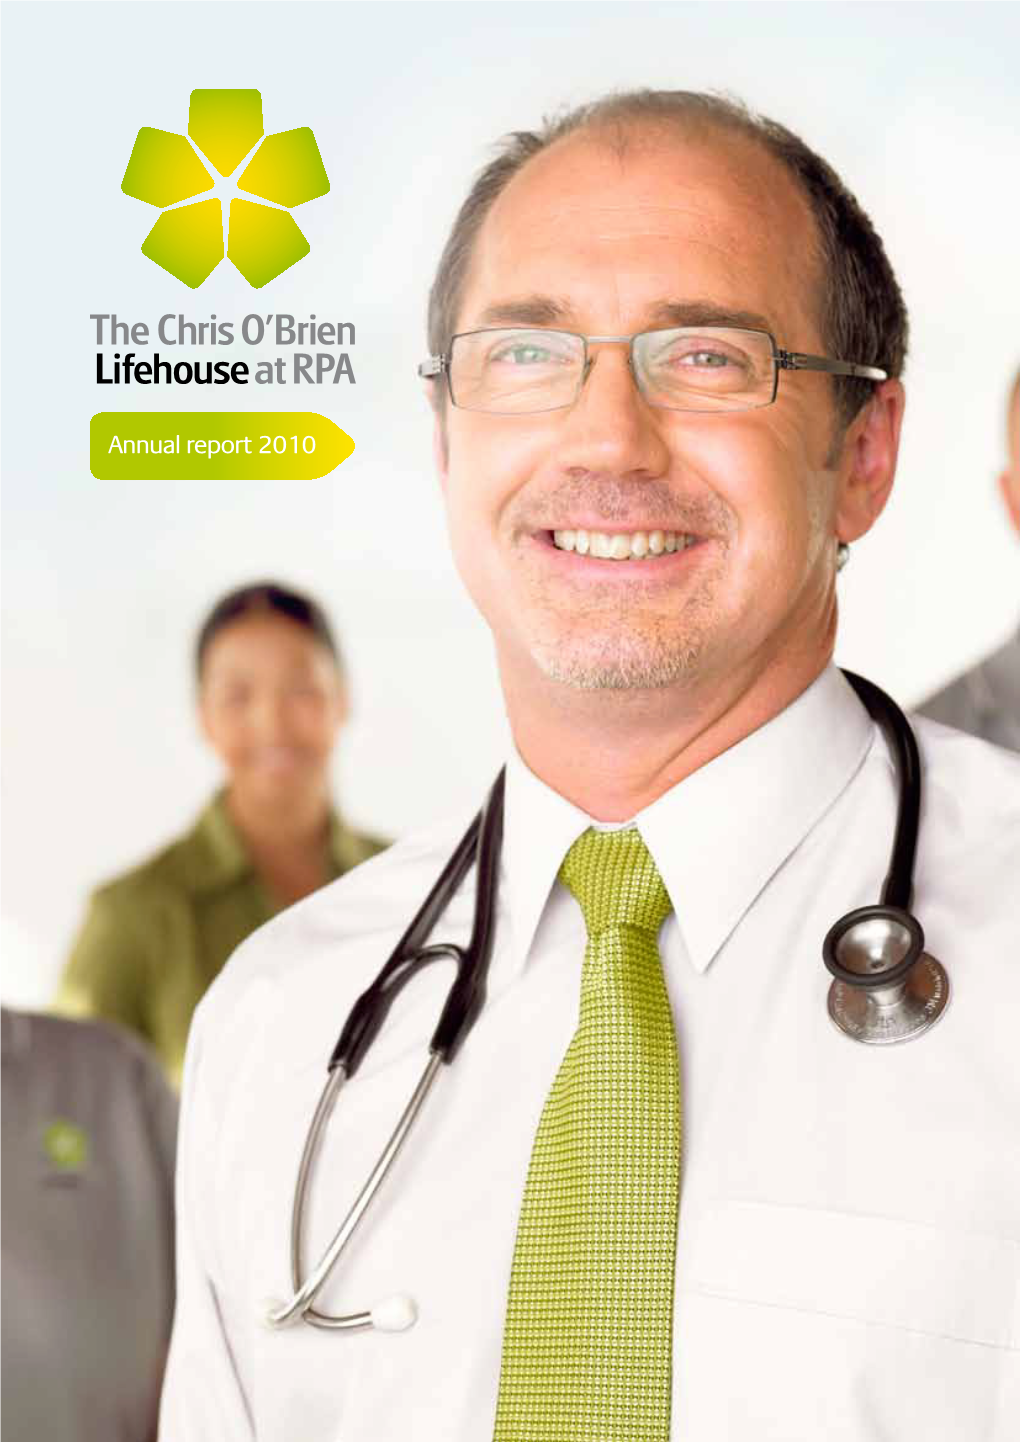 The Chris O'brien Lifehouse at RPA Annual Report 2010